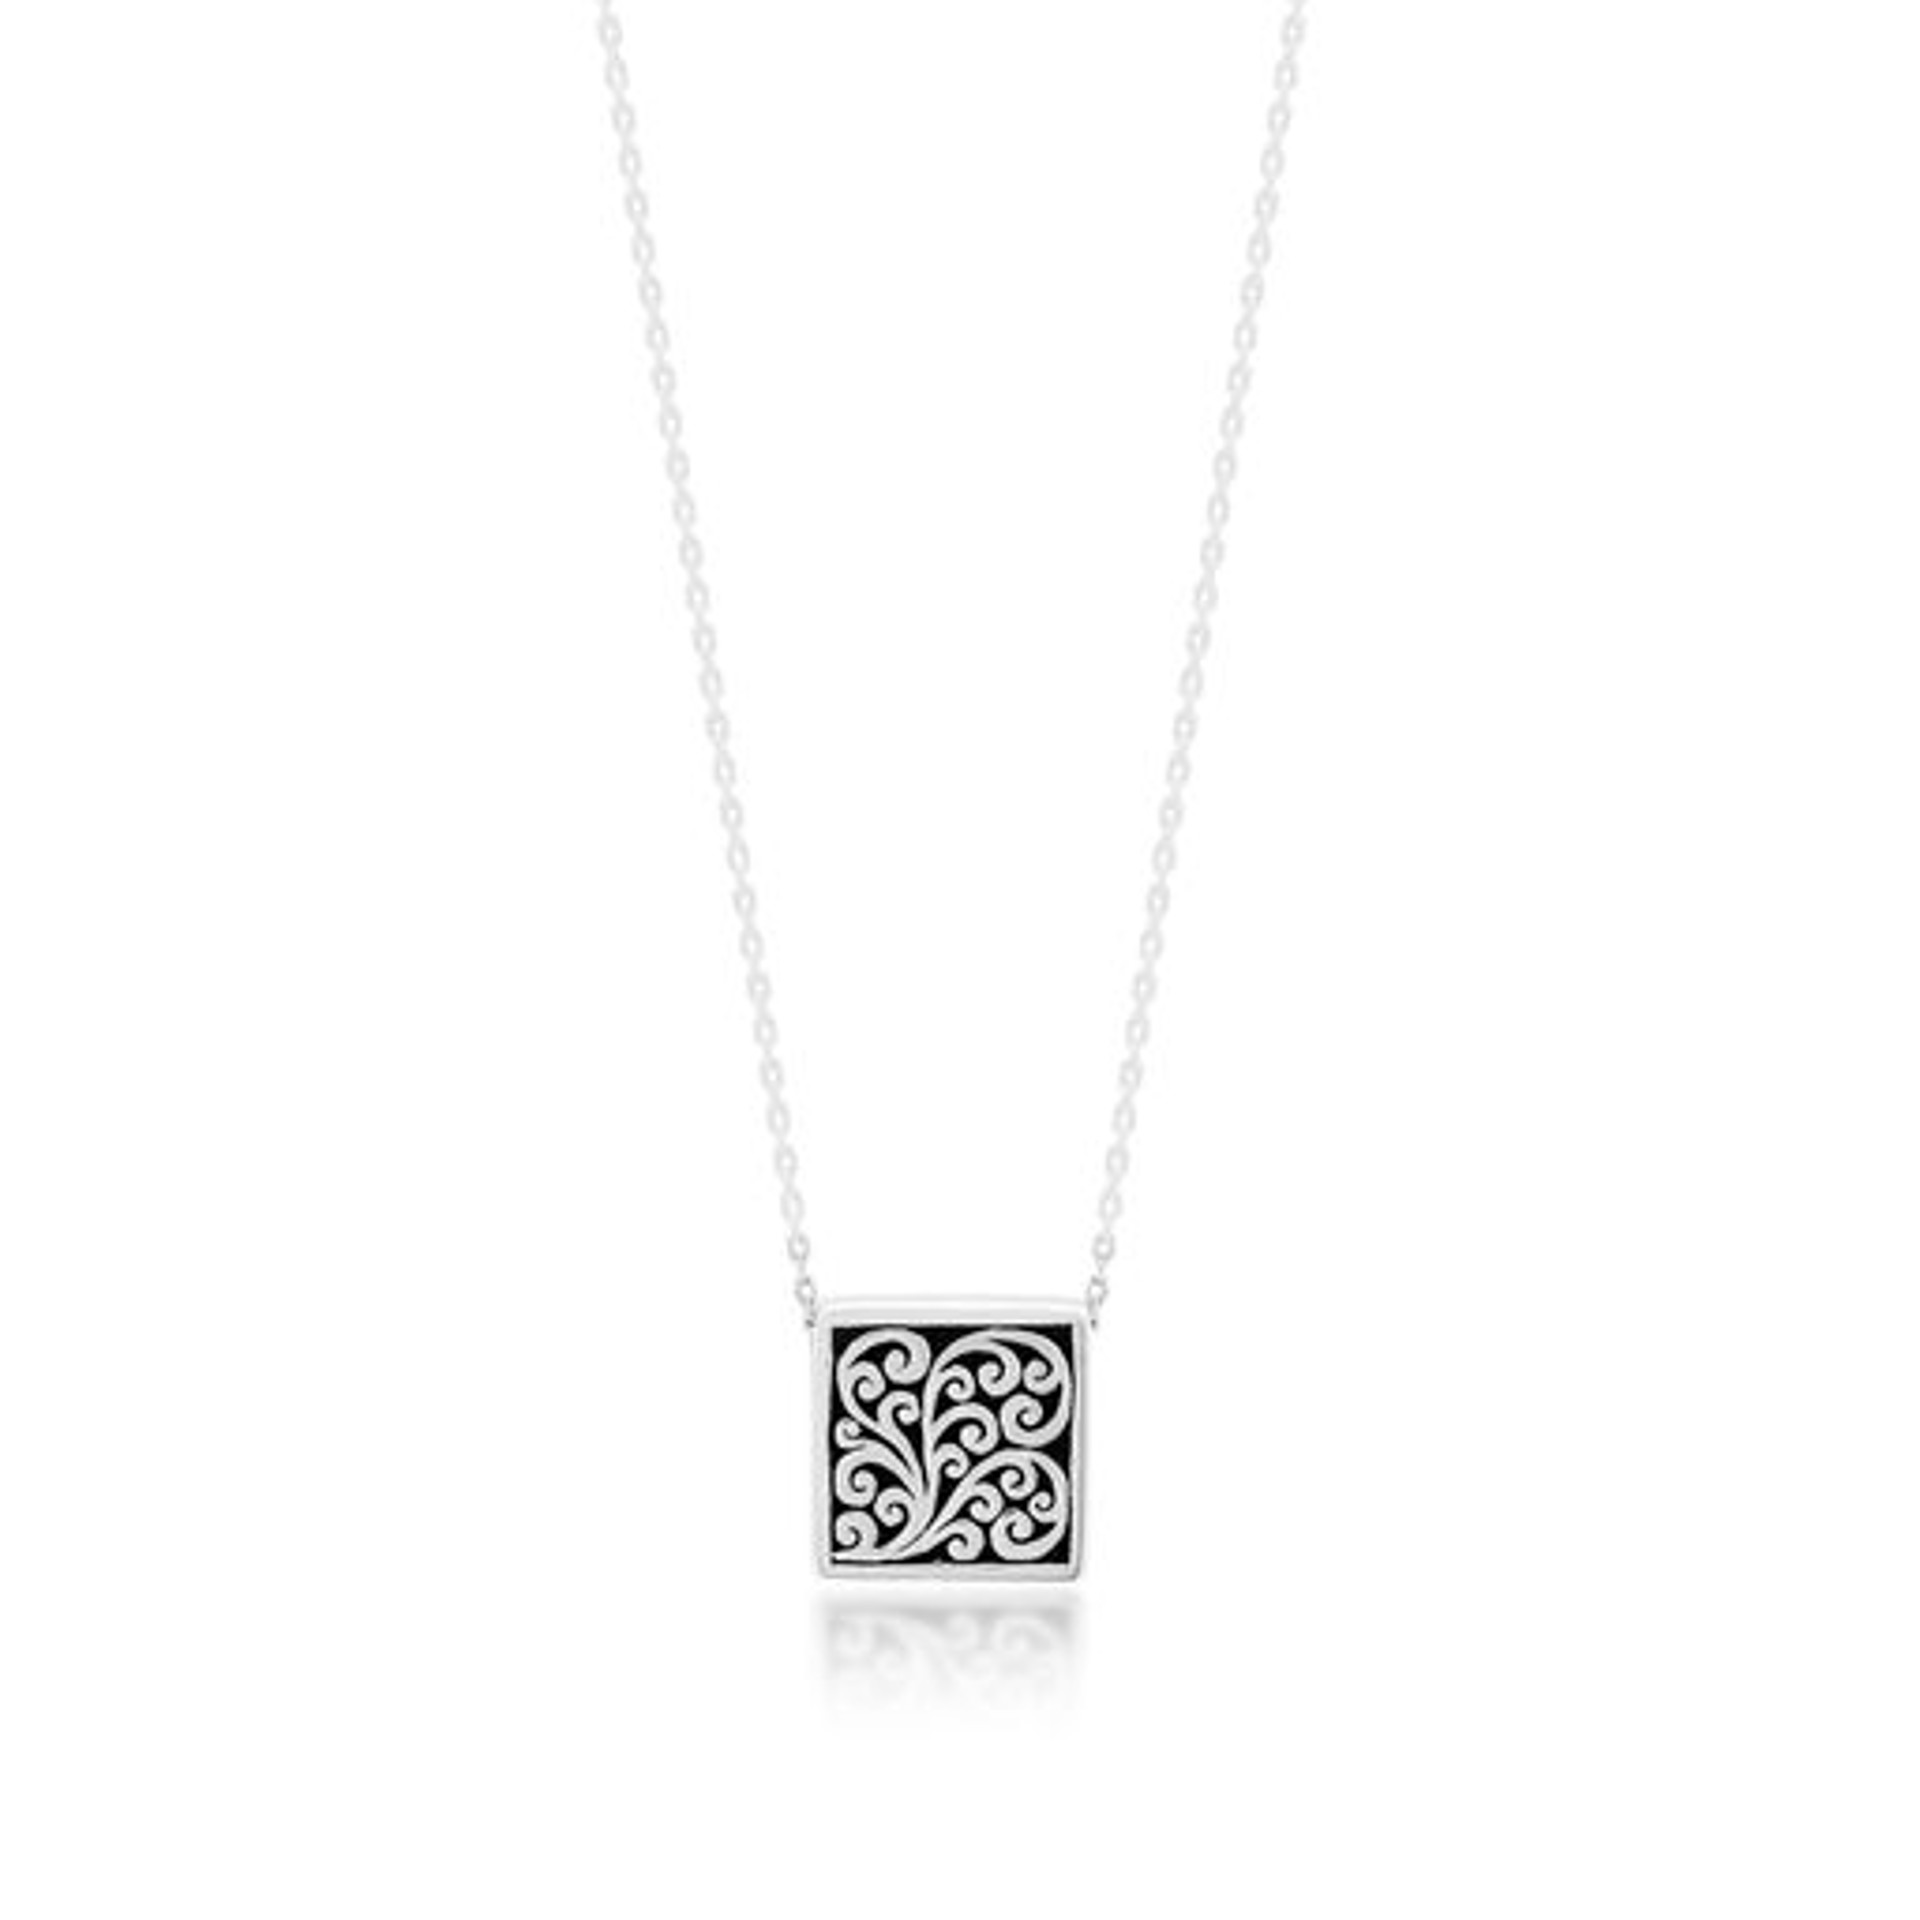 Square Pendant LH Scroll Necklace by Lois Hill